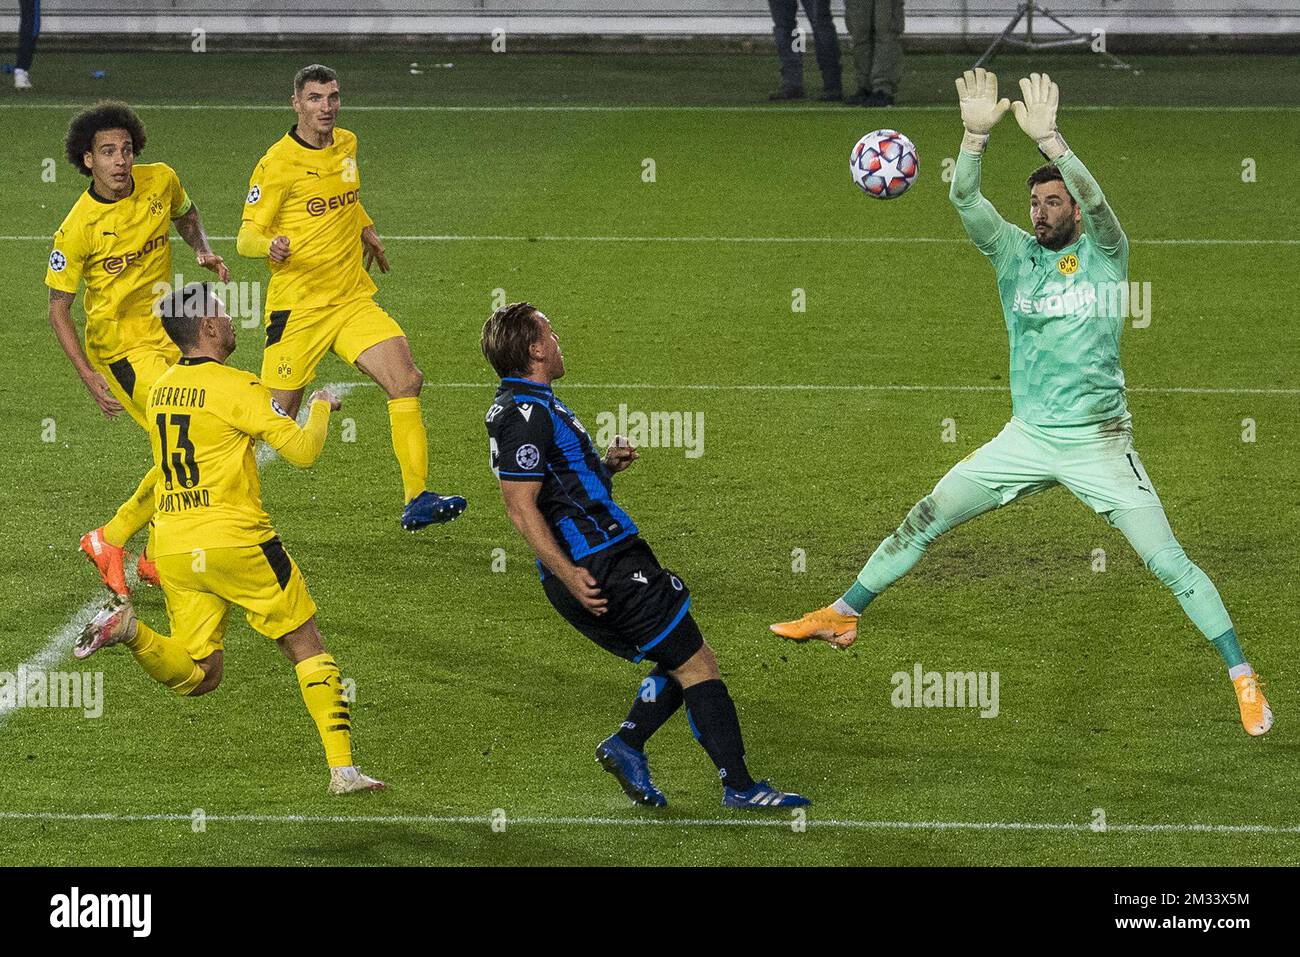 Dortmund's Raphael Guerreiro, Club's Ruud Vormer and Dortmund's goalkeeper Roman Burki fight for the ball during a soccer game between Belgian Club Brugge KV and German Ballspielverein Borussia 09 e.V. Dortmund, Wednesday 04 November 2020 in Brugge, the third group stage game of the UEFA Champions League, in group F. BELGA PHOTO JASPER JACOBS Stock Photo